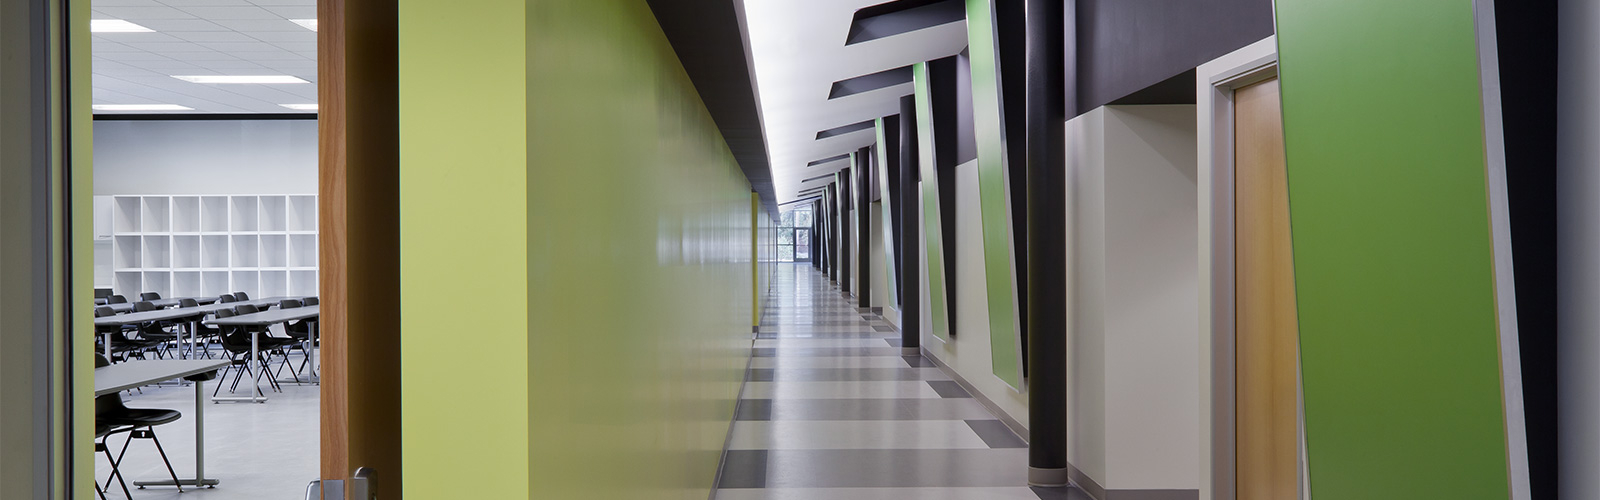 An image of a large empty classroom hallway with a green, gray and white colour combination.